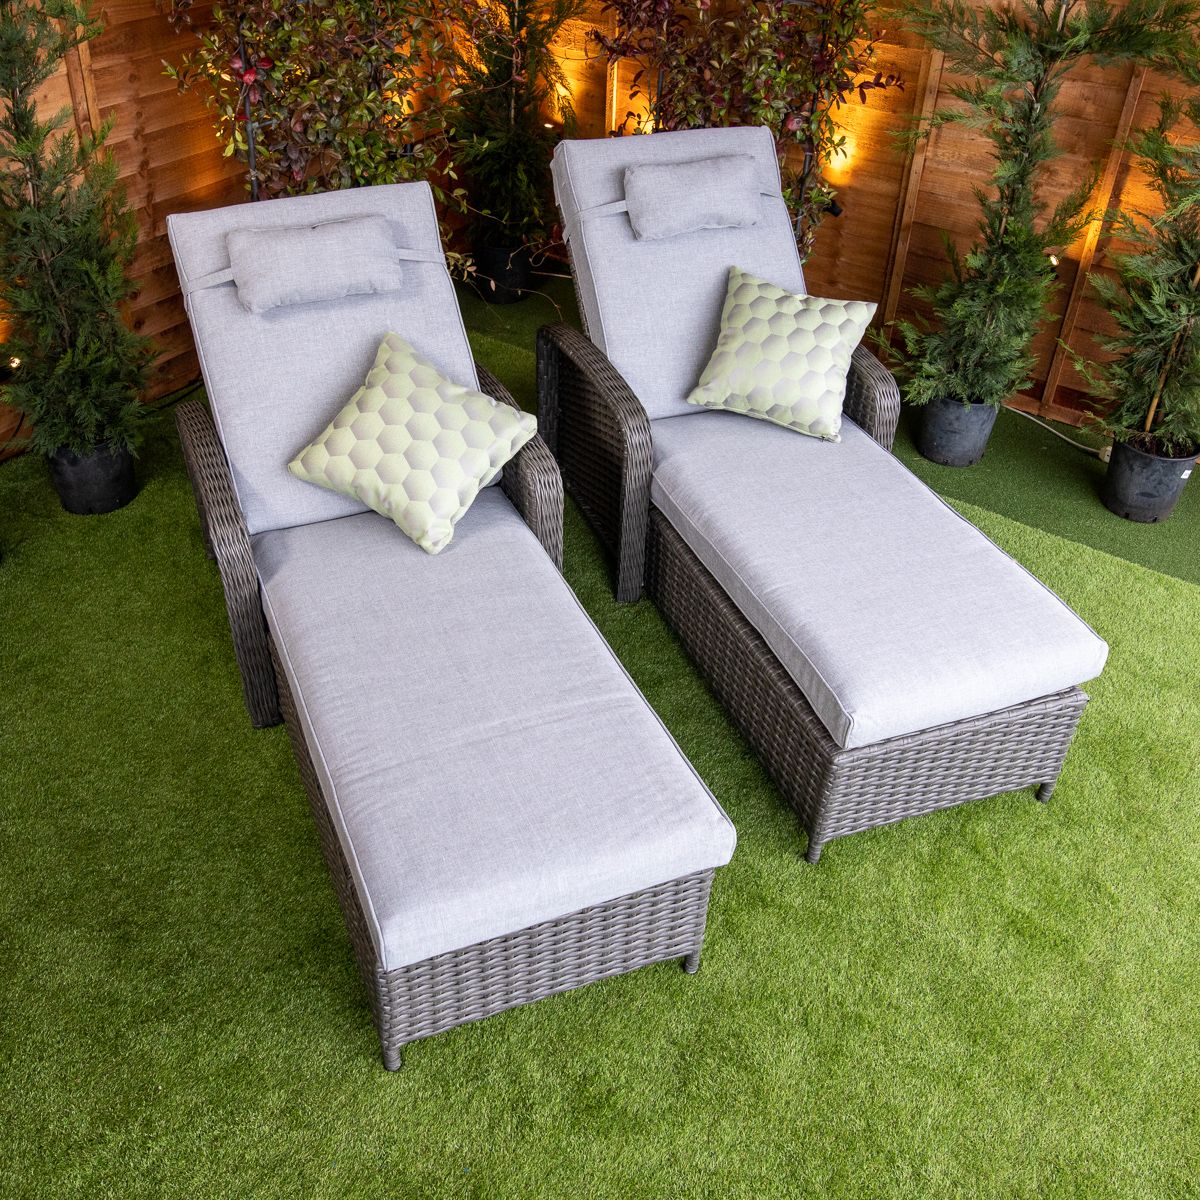 Choosing the Right Cushions and Fabrics for Your Rattan Garden Furniture